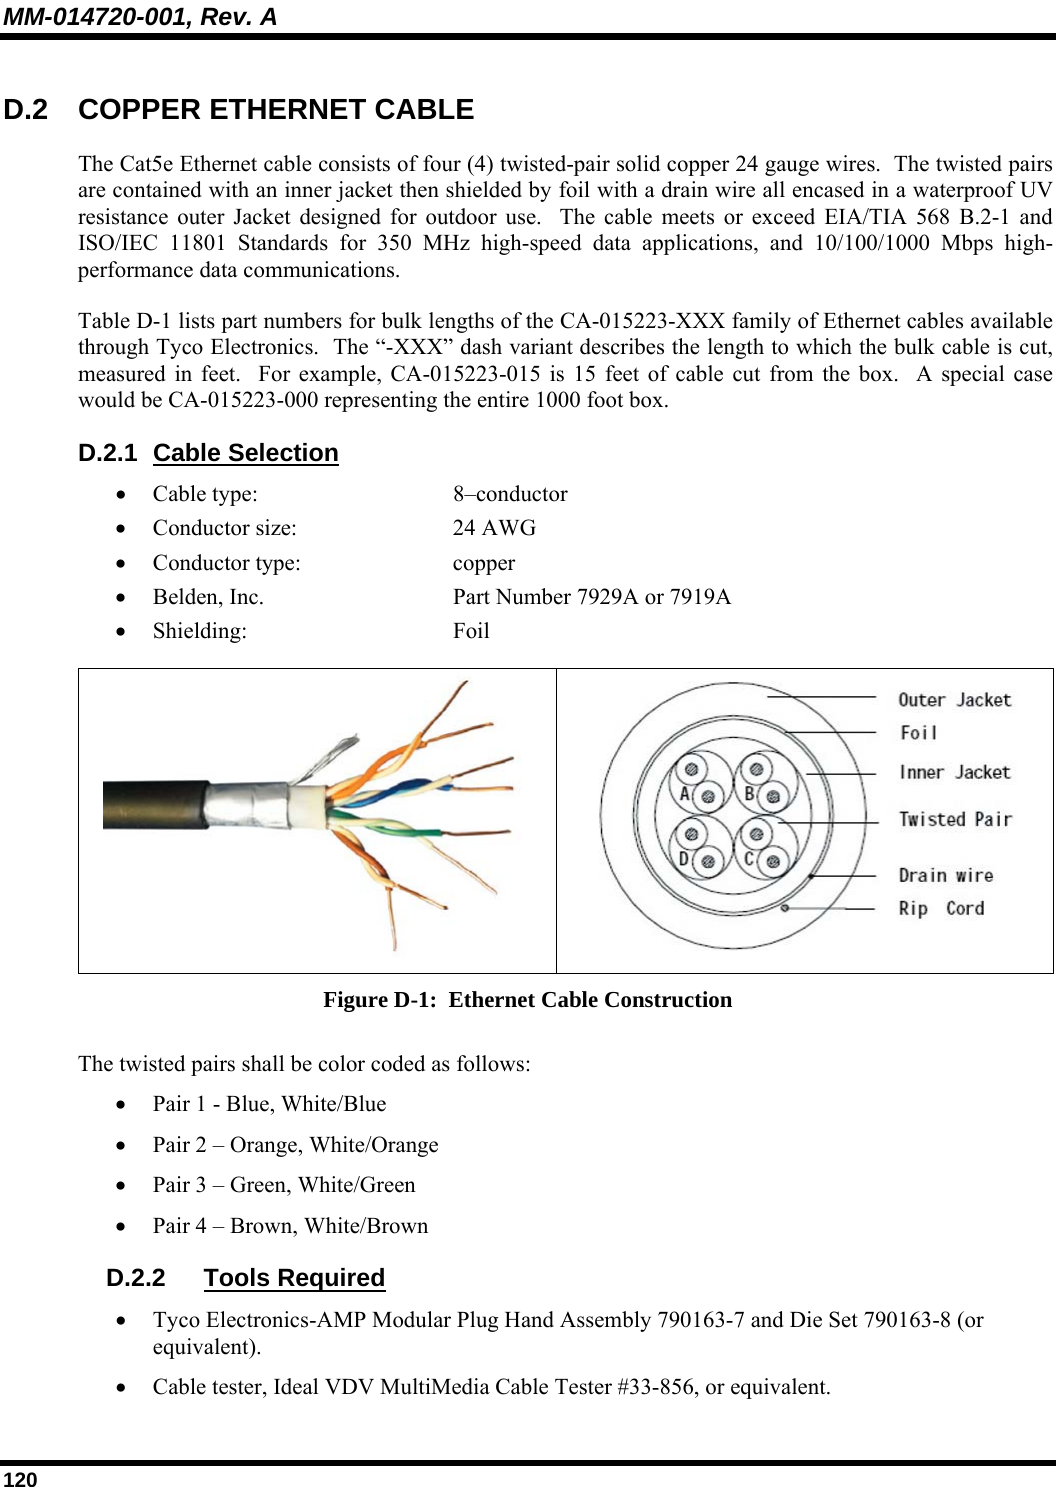 MM-014720-001, Rev. A 120 D.2  COPPER ETHERNET CABLE The Cat5e Ethernet cable consists of four (4) twisted-pair solid copper 24 gauge wires.  The twisted pairs are contained with an inner jacket then shielded by foil with a drain wire all encased in a waterproof UV resistance outer Jacket designed for outdoor use.  The cable meets or exceed EIA/TIA 568 B.2-1 and ISO/IEC 11801 Standards for 350 MHz high-speed data applications, and 10/100/1000 Mbps high-performance data communications. Table D-1 lists part numbers for bulk lengths of the CA-015223-XXX family of Ethernet cables available through Tyco Electronics.  The “-XXX” dash variant describes the length to which the bulk cable is cut, measured in feet.  For example, CA-015223-015 is 15 feet of cable cut from the box.  A special case would be CA-015223-000 representing the entire 1000 foot box. D.2.1 Cable Selection • Cable type:     8–conductor • Conductor size:   24 AWG • Conductor type:   copper • Belden, Inc.      Part Number 7929A or 7919A • Shielding:   Foil    Figure D-1:  Ethernet Cable Construction The twisted pairs shall be color coded as follows: • Pair 1 - Blue, White/Blue • Pair 2 – Orange, White/Orange • Pair 3 – Green, White/Green • Pair 4 – Brown, White/Brown D.2.2 Tools Required • Tyco Electronics-AMP Modular Plug Hand Assembly 790163-7 and Die Set 790163-8 (or equivalent). • Cable tester, Ideal VDV MultiMedia Cable Tester #33-856, or equivalent. 